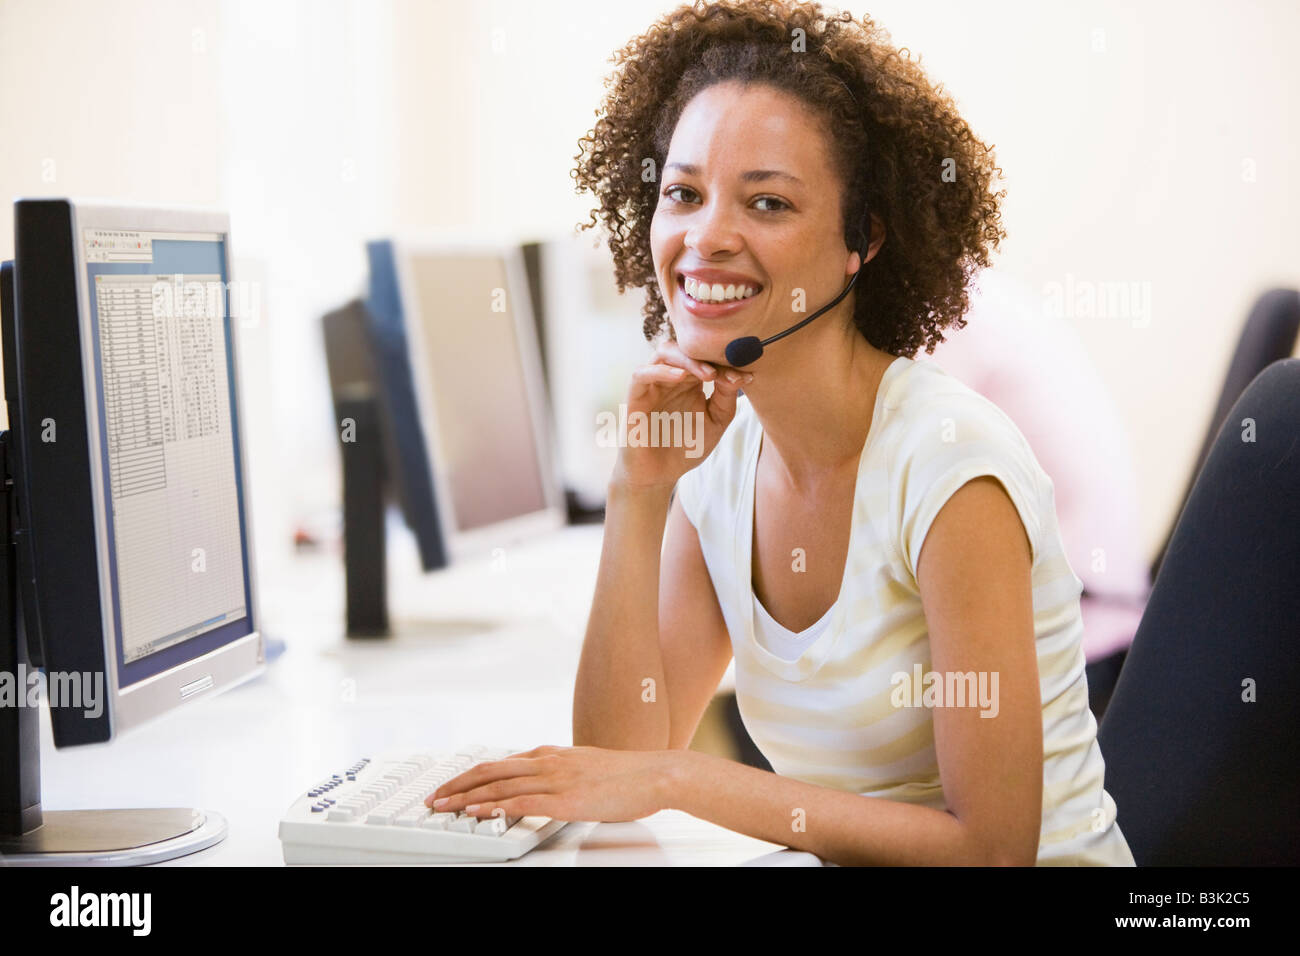 Woman wearing headset in computer room smiling Stock Photo